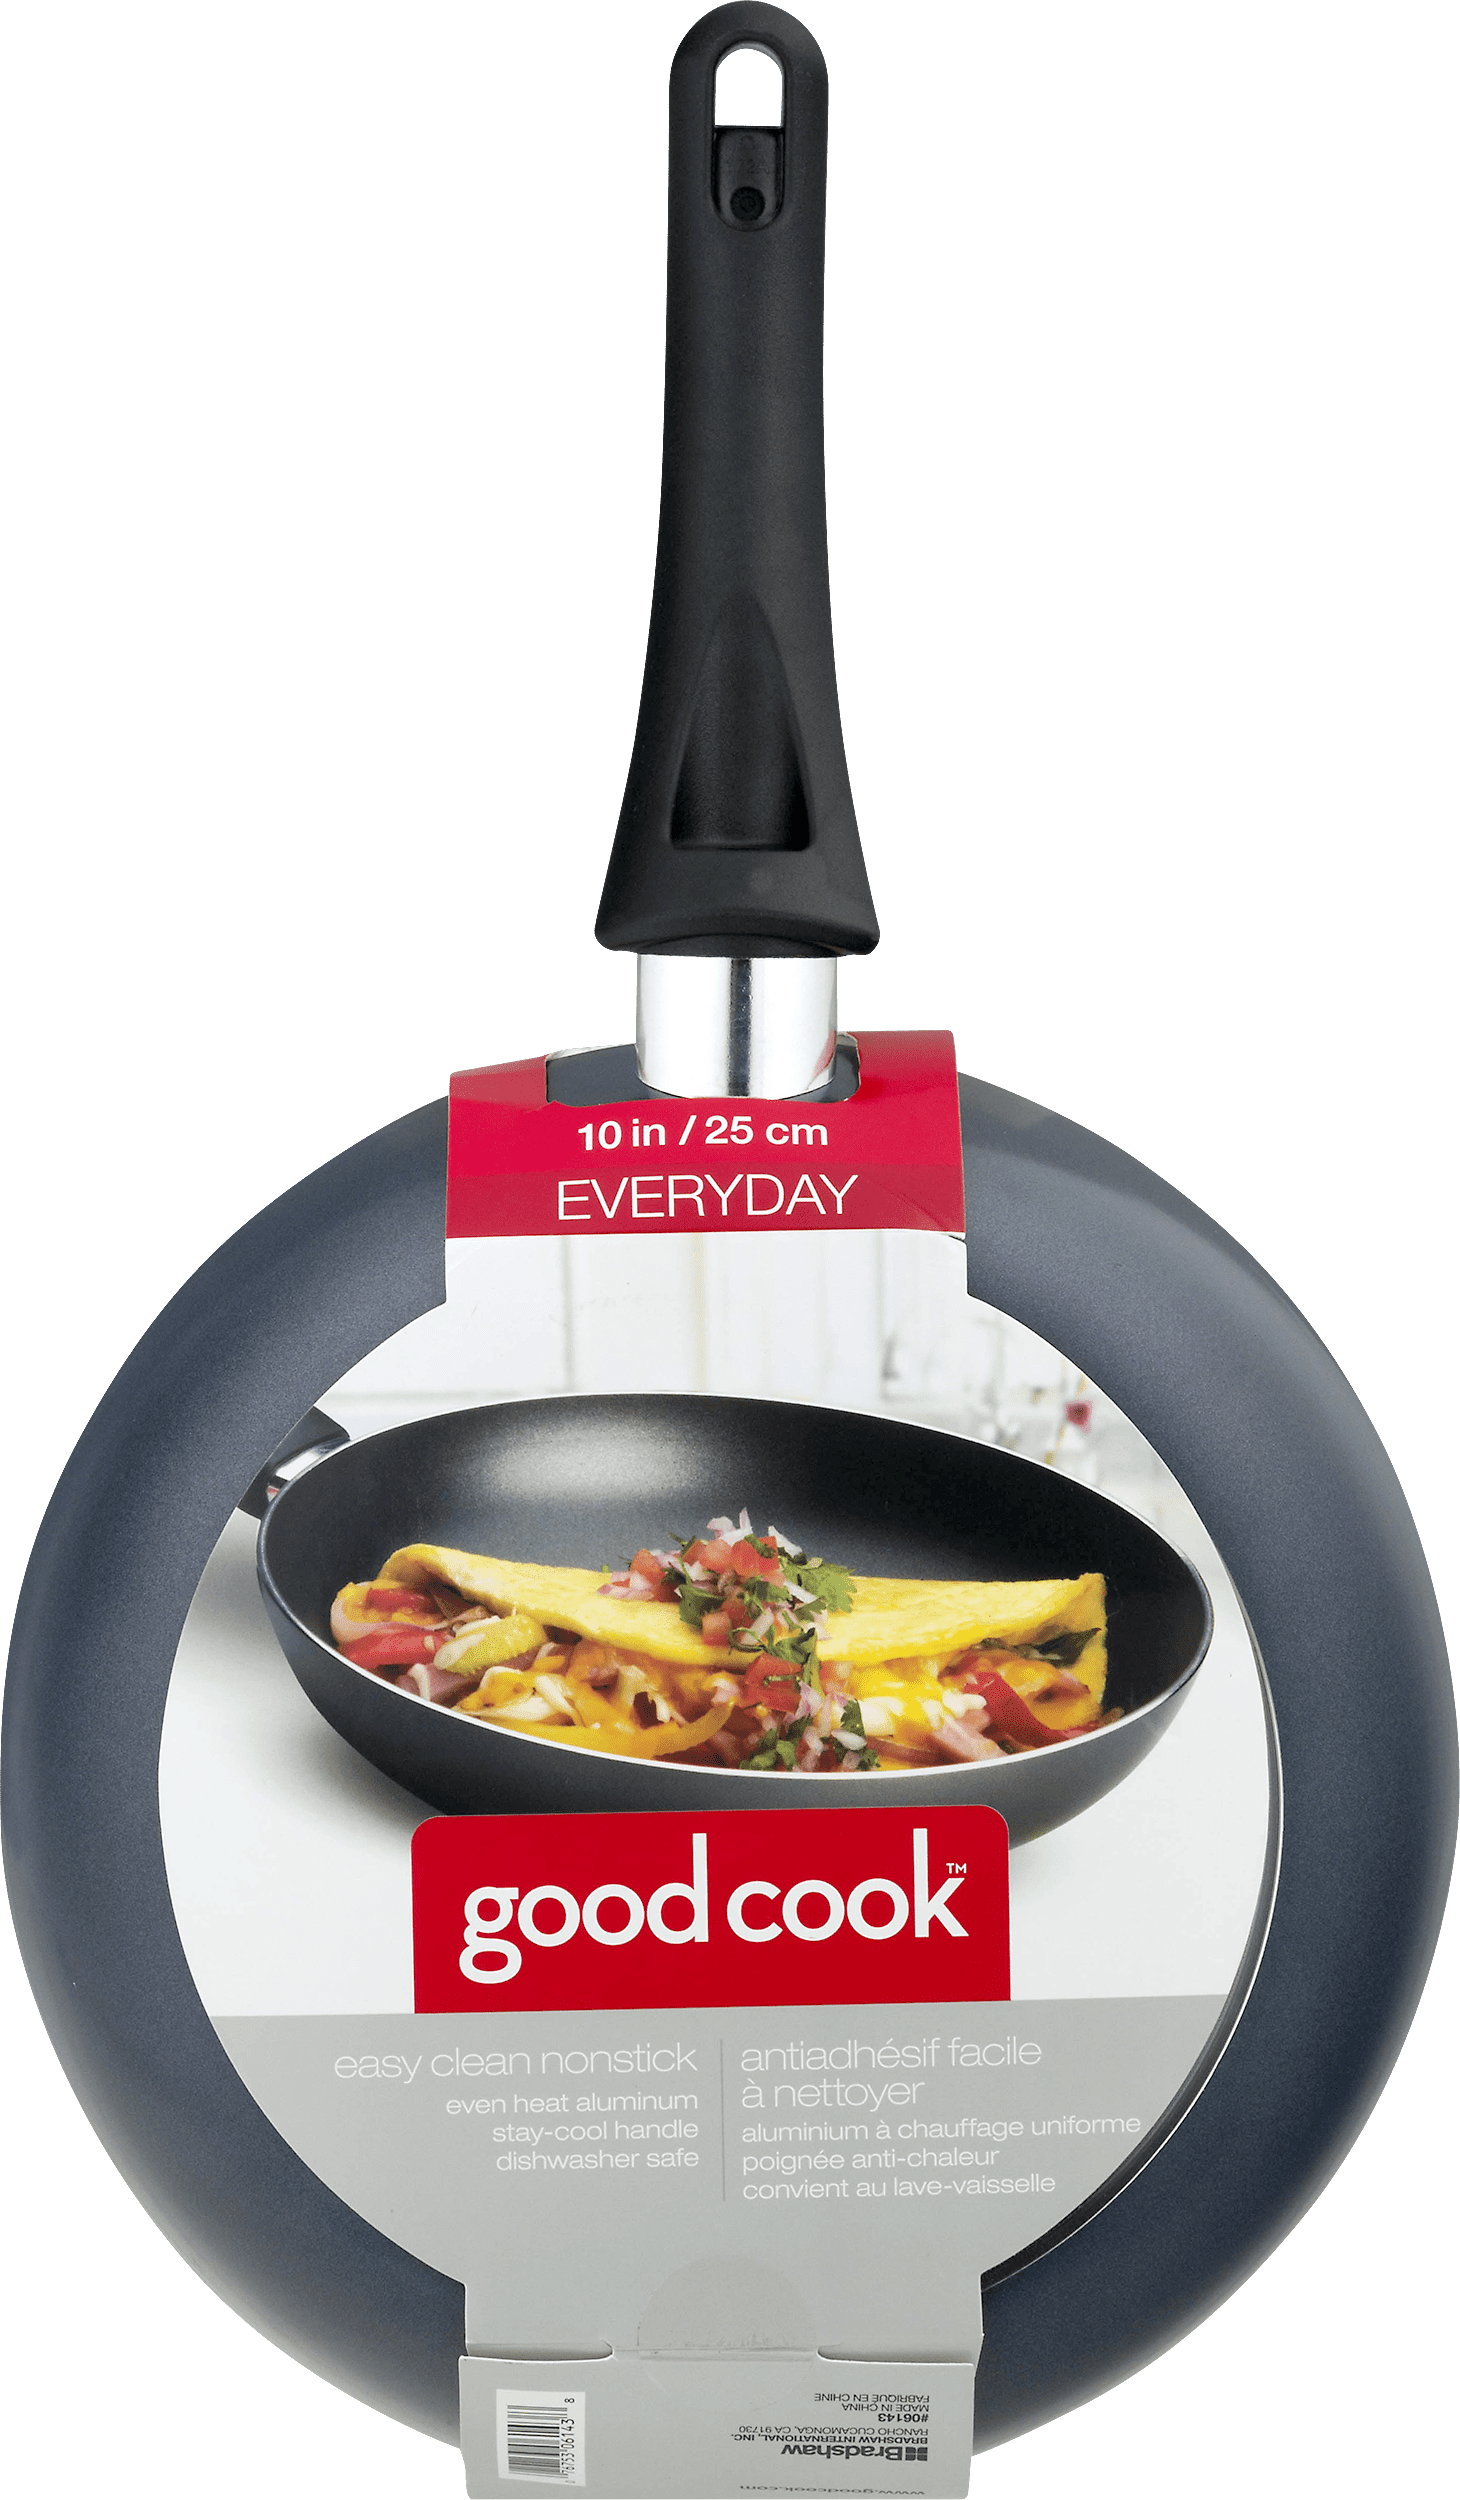 MsMk Non-Stick Small 8 Inch Enamel Frying Pan Grey - Stain-Resistant,  Dishwasher Safe, Easy to Clean - Perfect for Runny Eggs, Steak, Avocado 